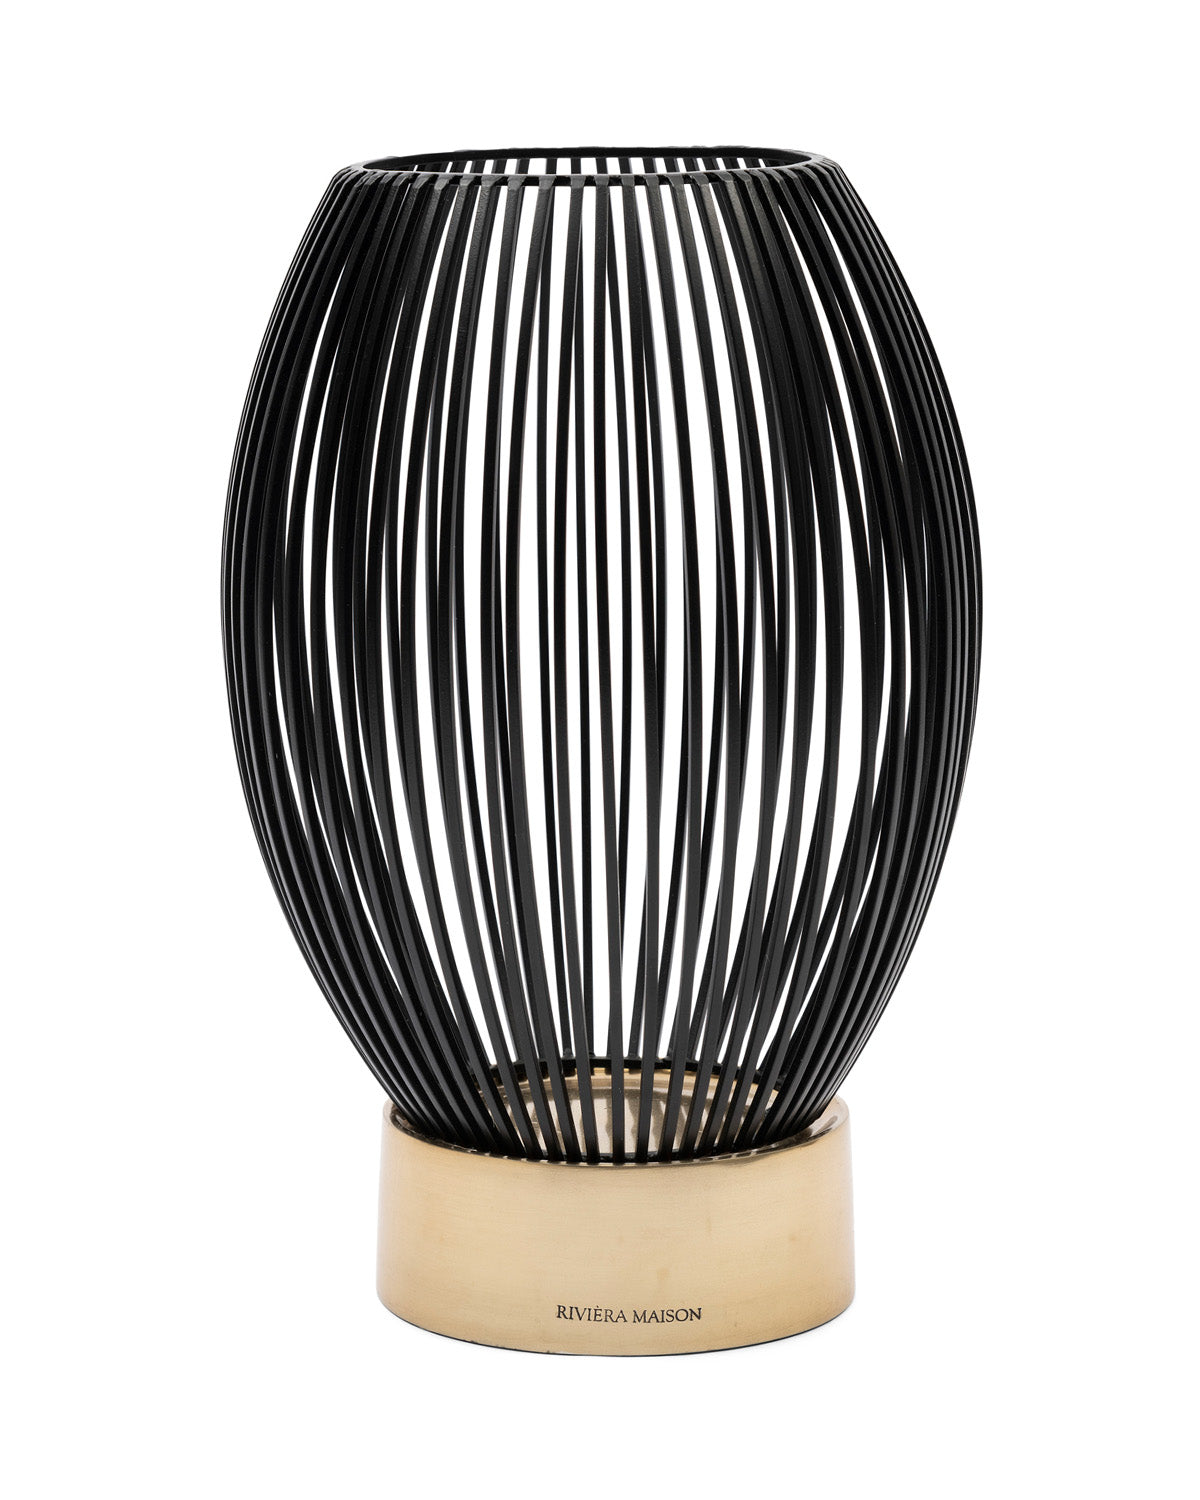 Wind-light in color black  with a gold base by Riviera Maison